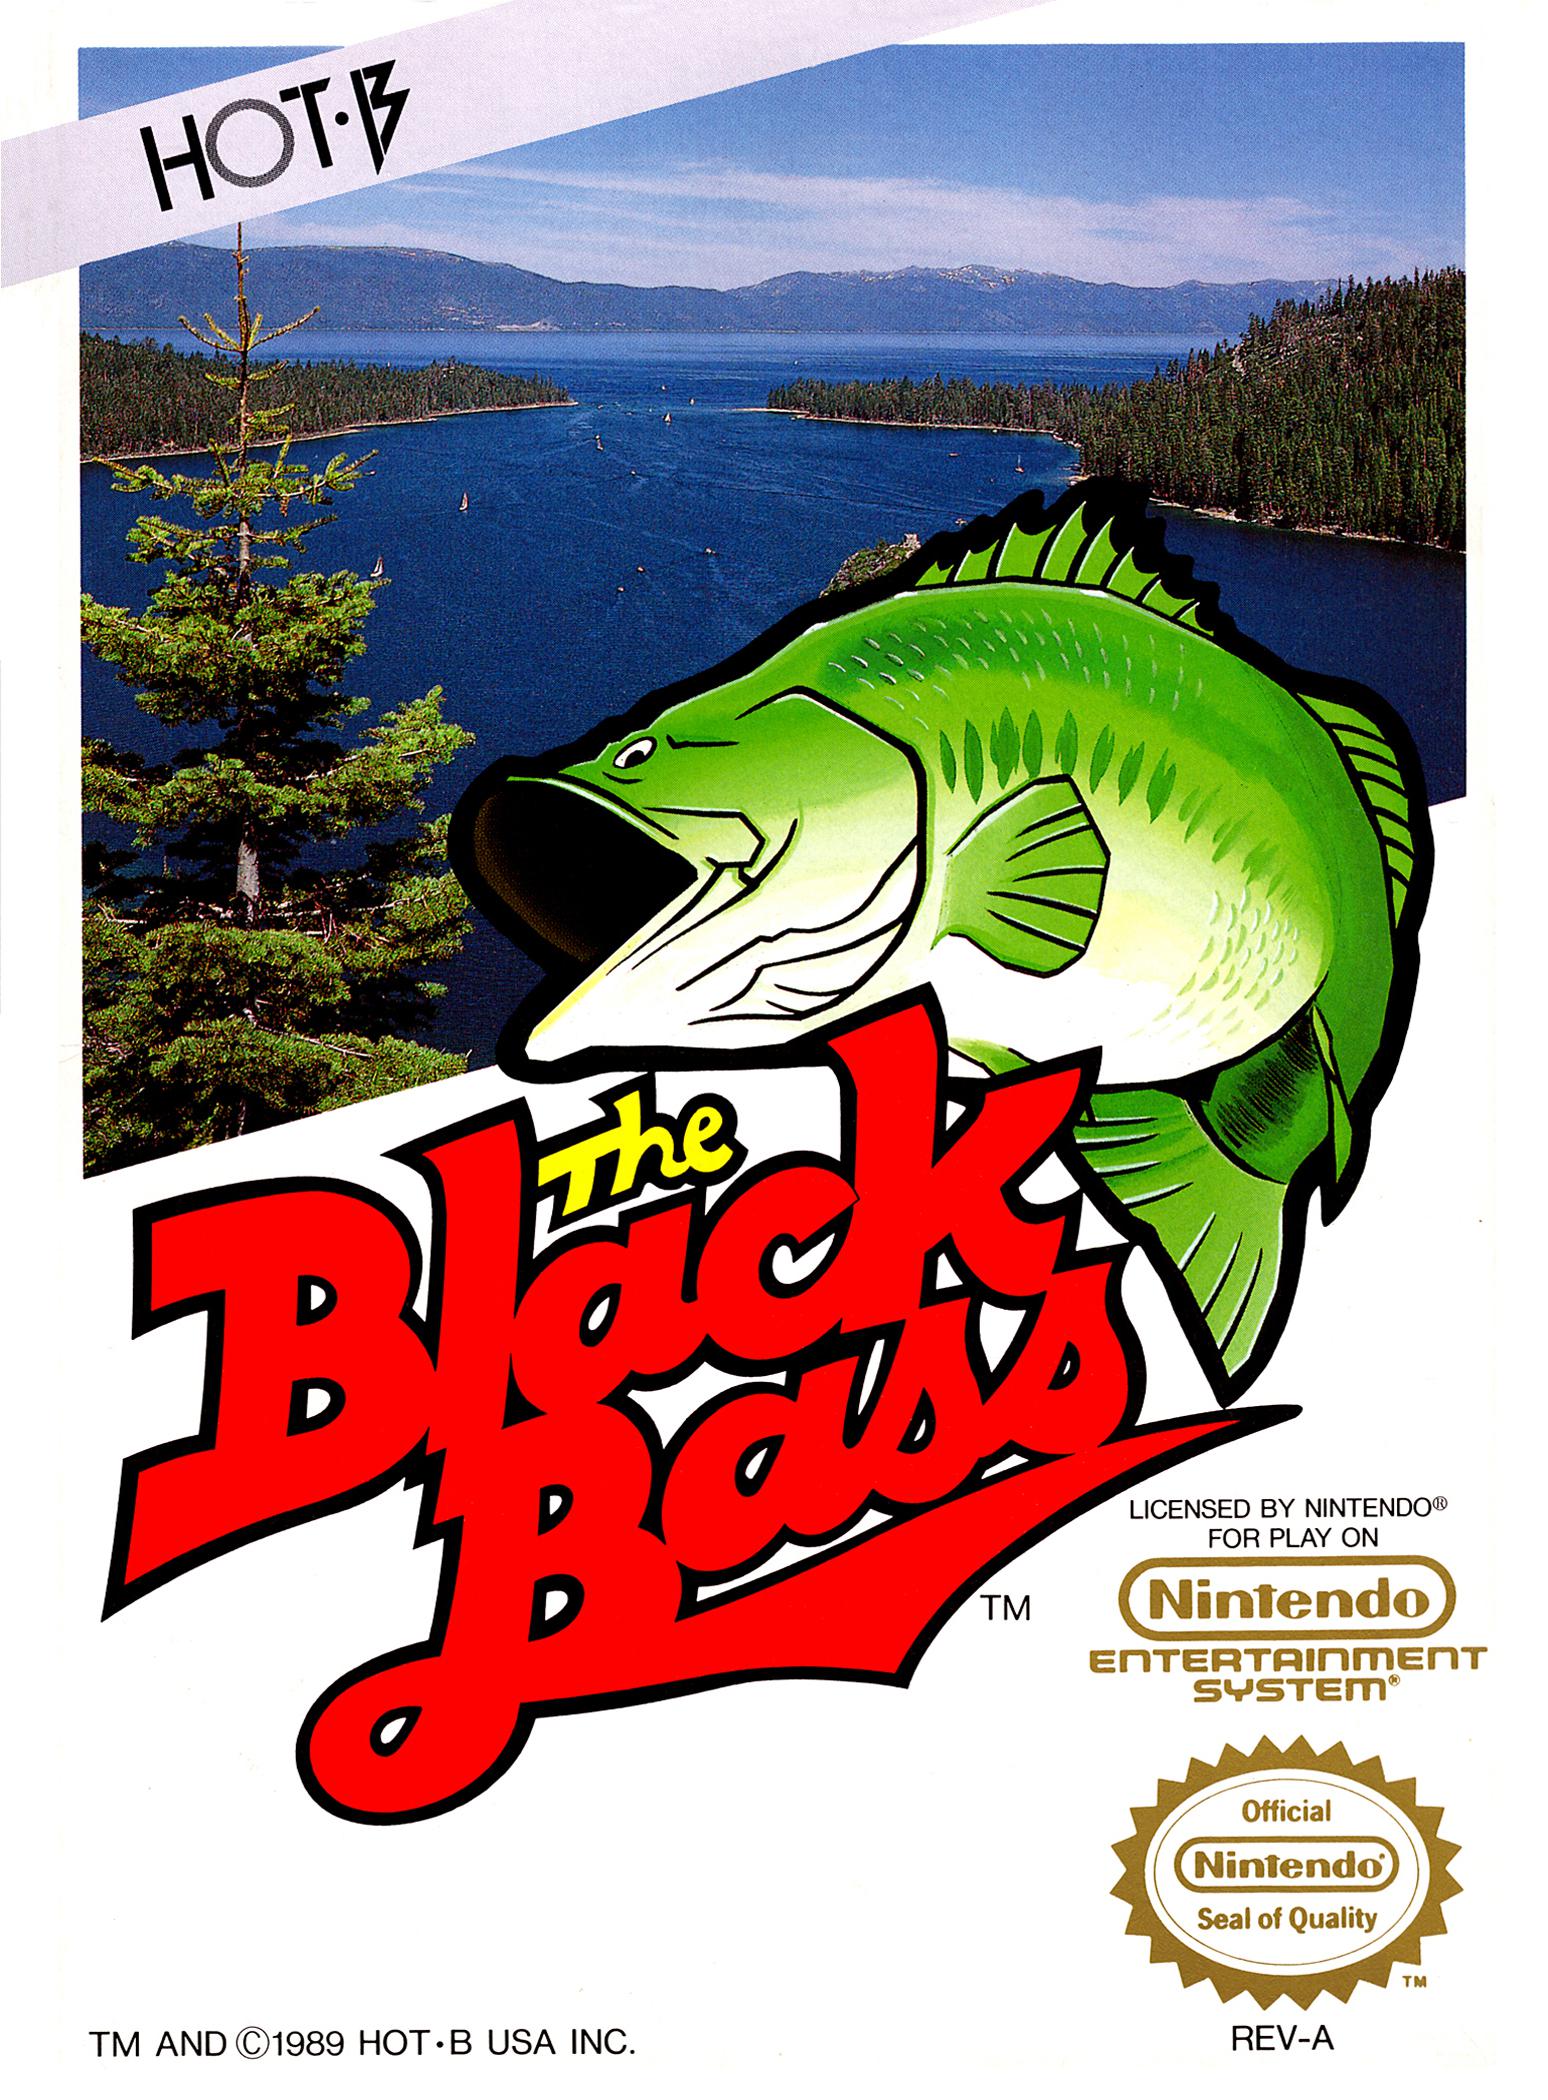 Take on the NES Library » #83 – The Black Bass